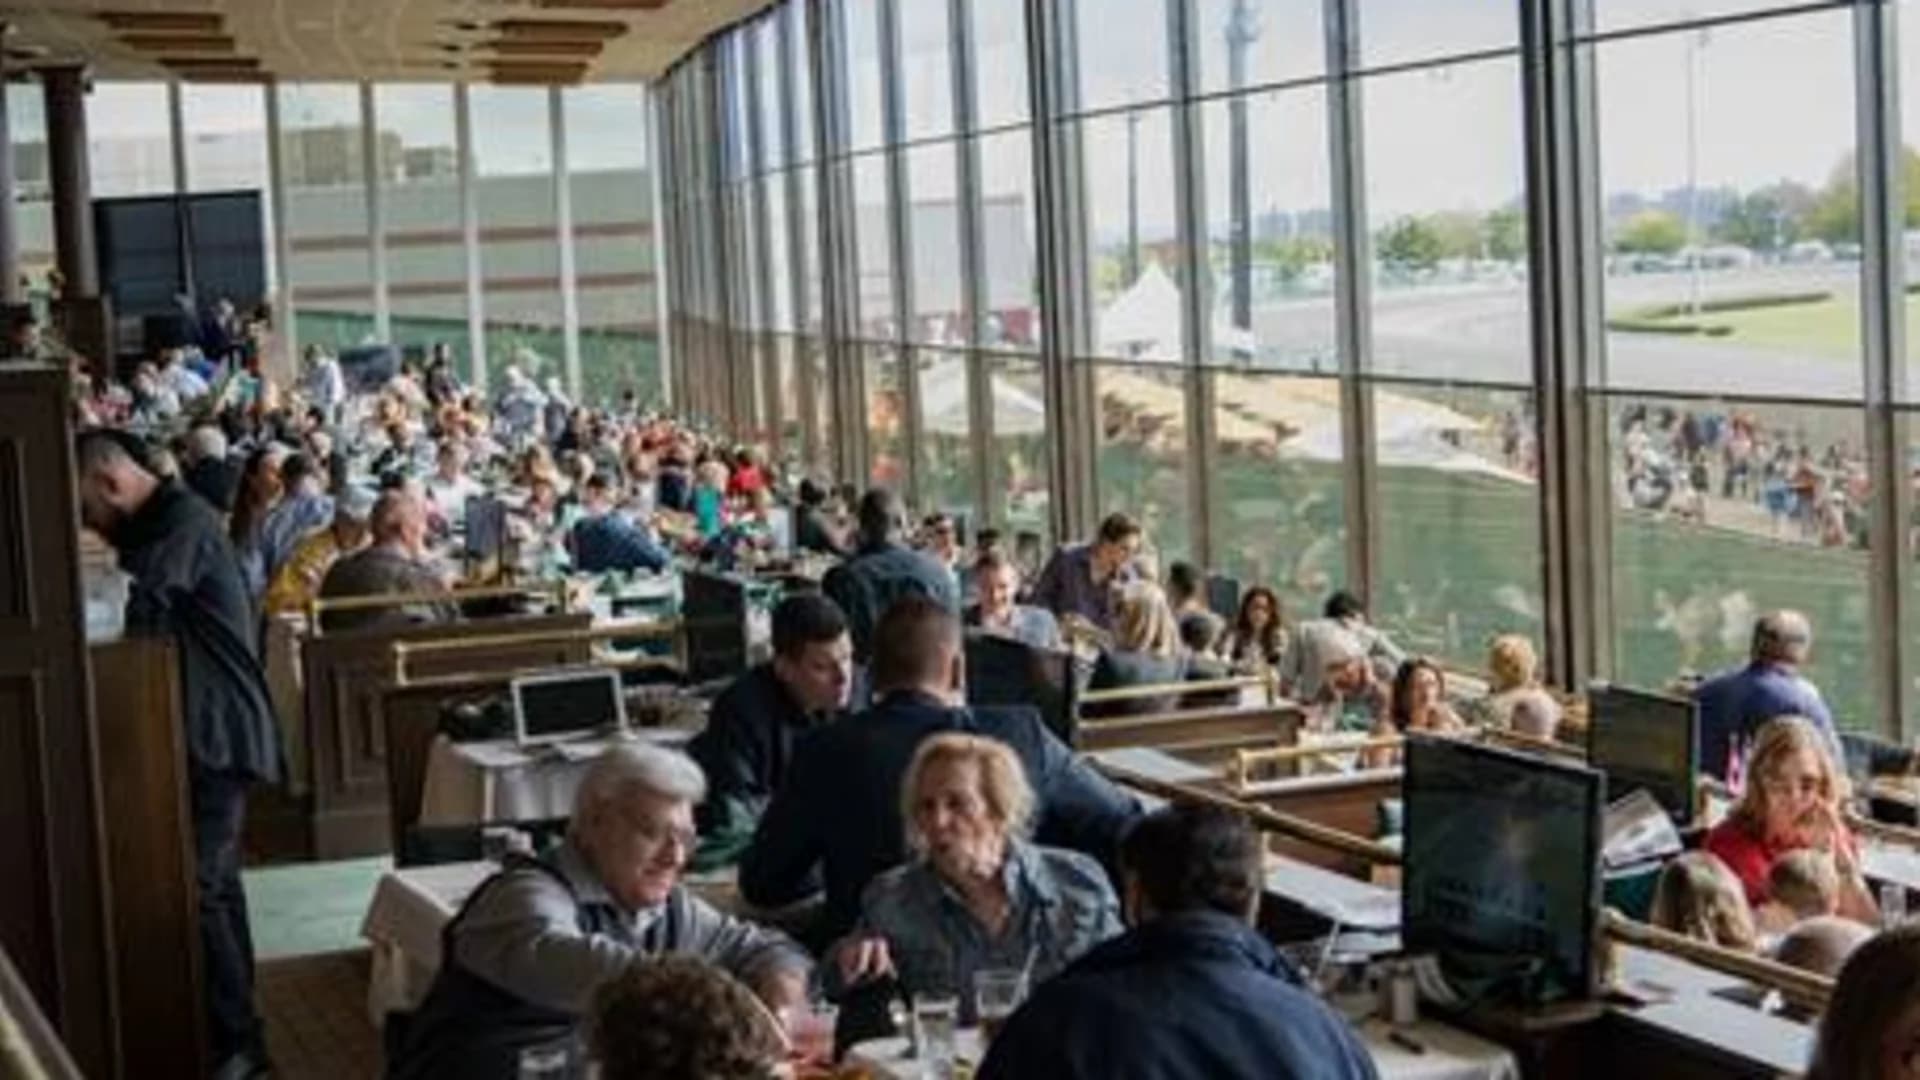 Empire Terrace open for special evening of food, wagering and watching at Yonkers Raceway on Friday